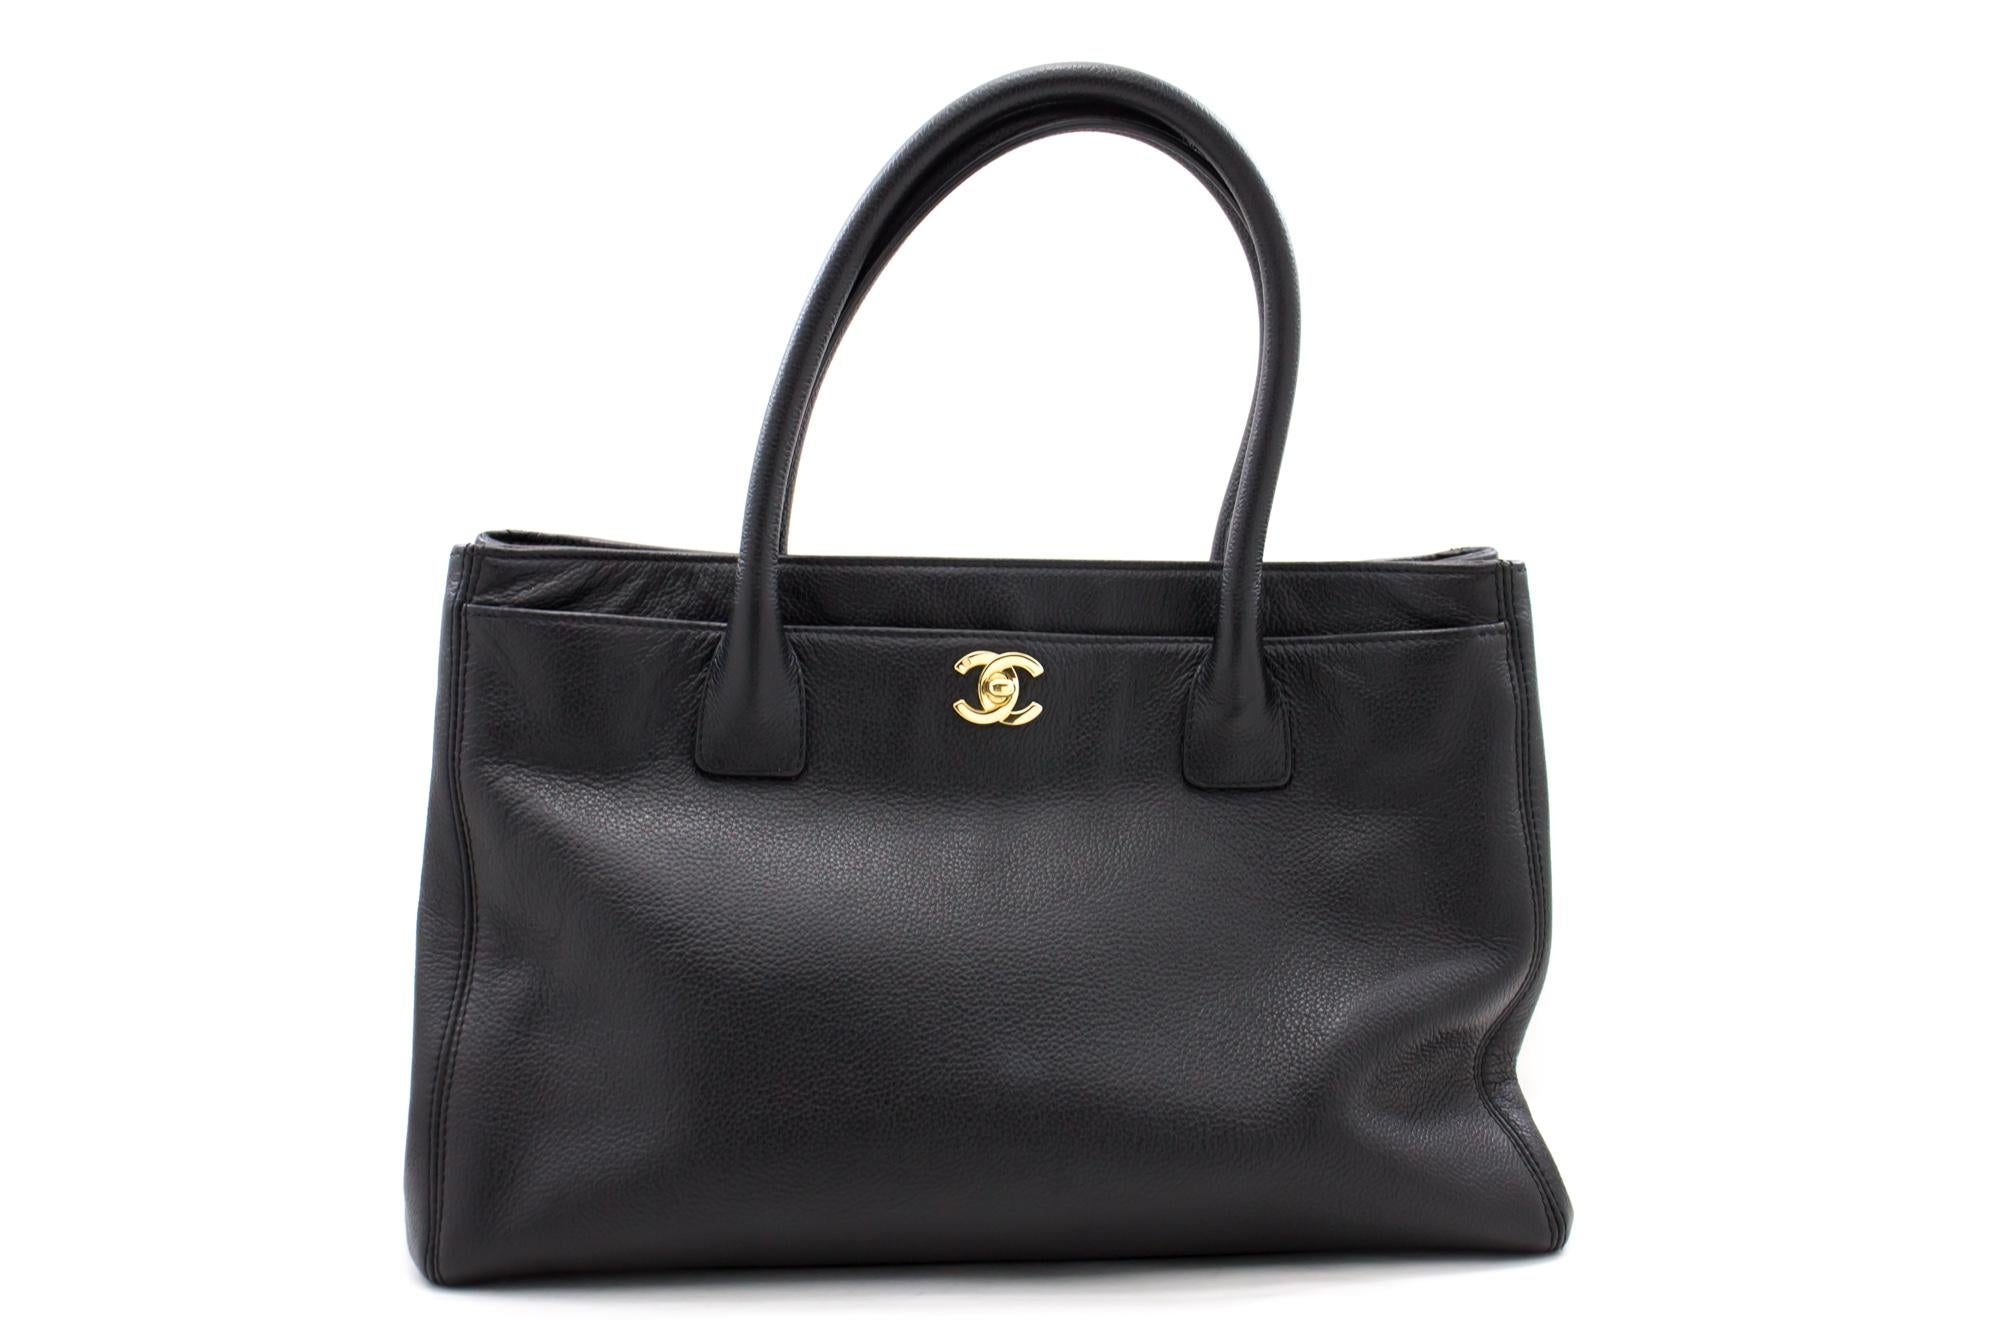 An authentic CHANEL Executive Tote Caviar Shoulder Bag Handbag Black Gold Strap. The color is Black. The outside material is Leather. The pattern is Solid. This item is Contemporary. The year of manufacture would be 2004.
Conditions &